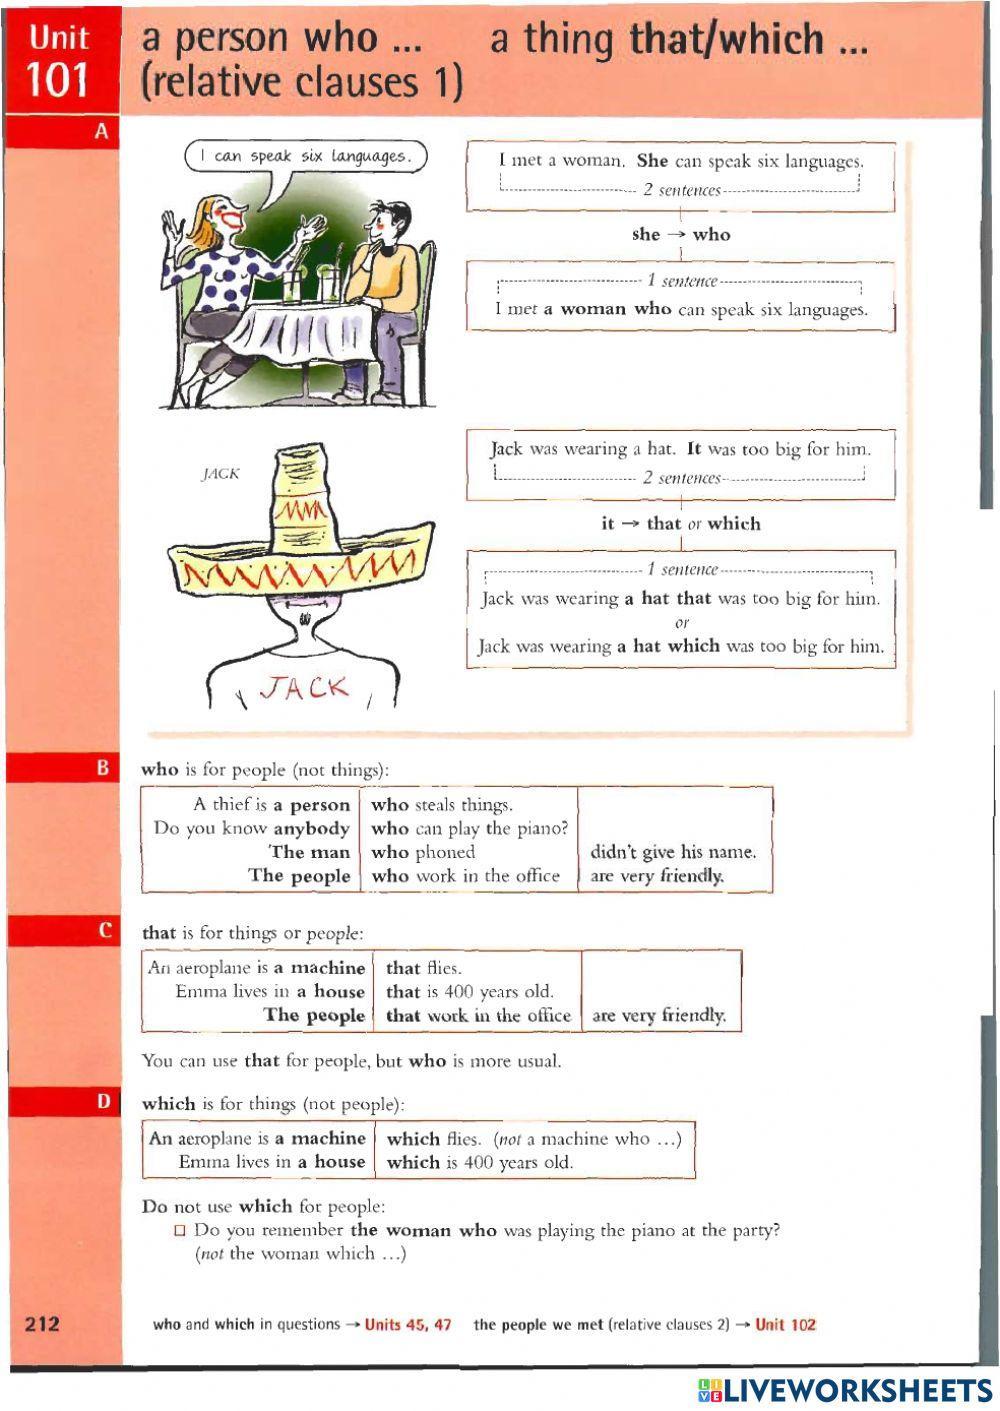 Relative Clauses1